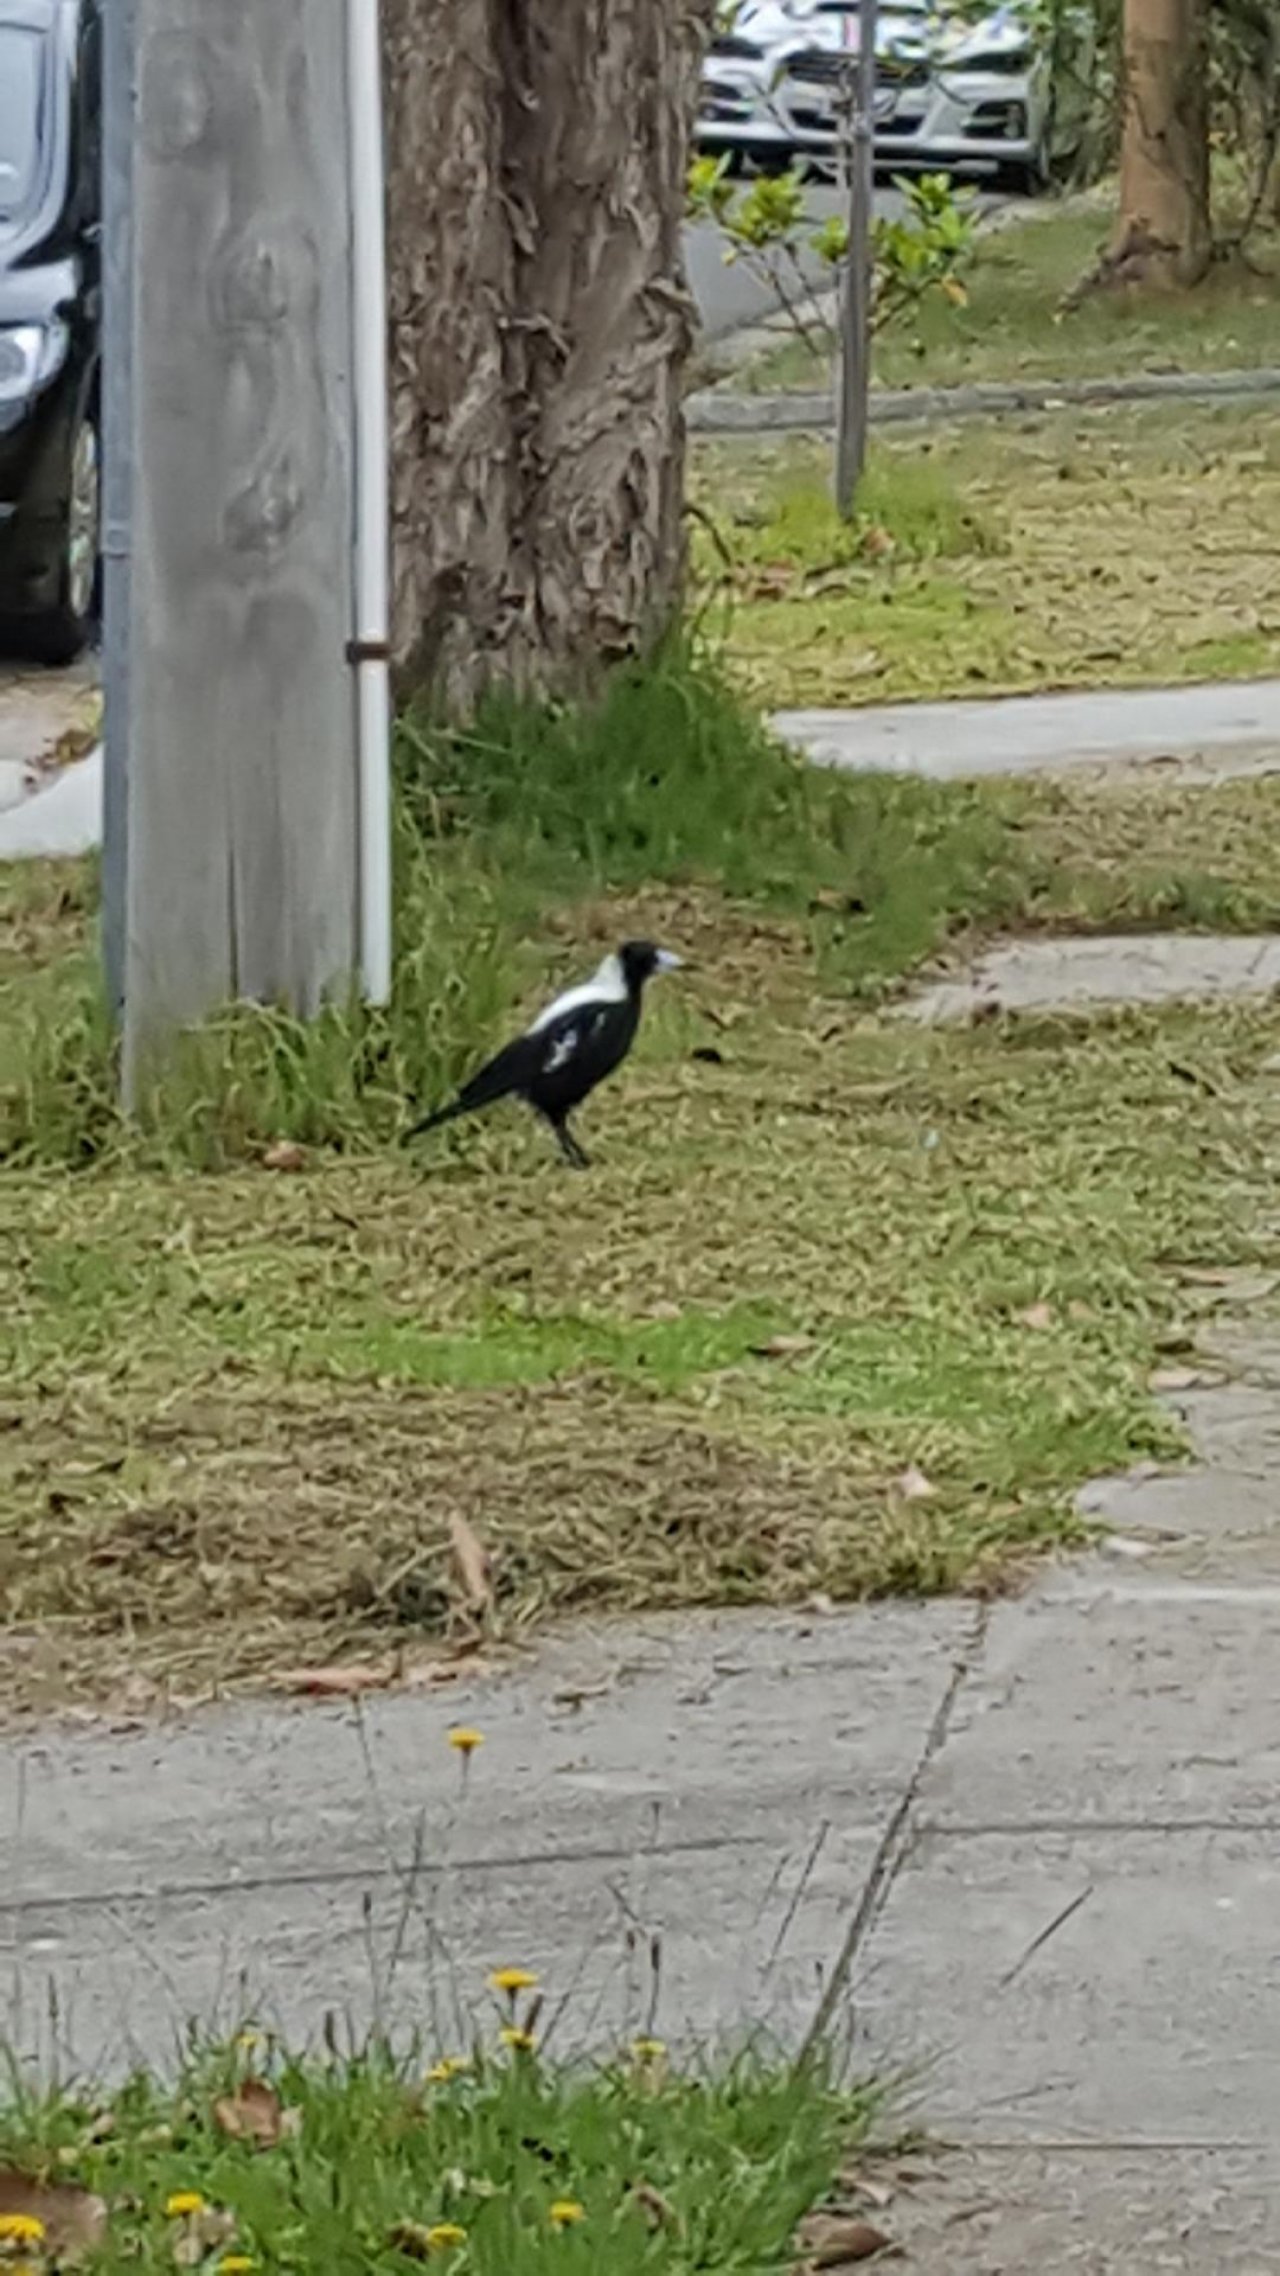 Australian Magpie in ClimateWatch App spotted by VR Nathan on 16.12.2020